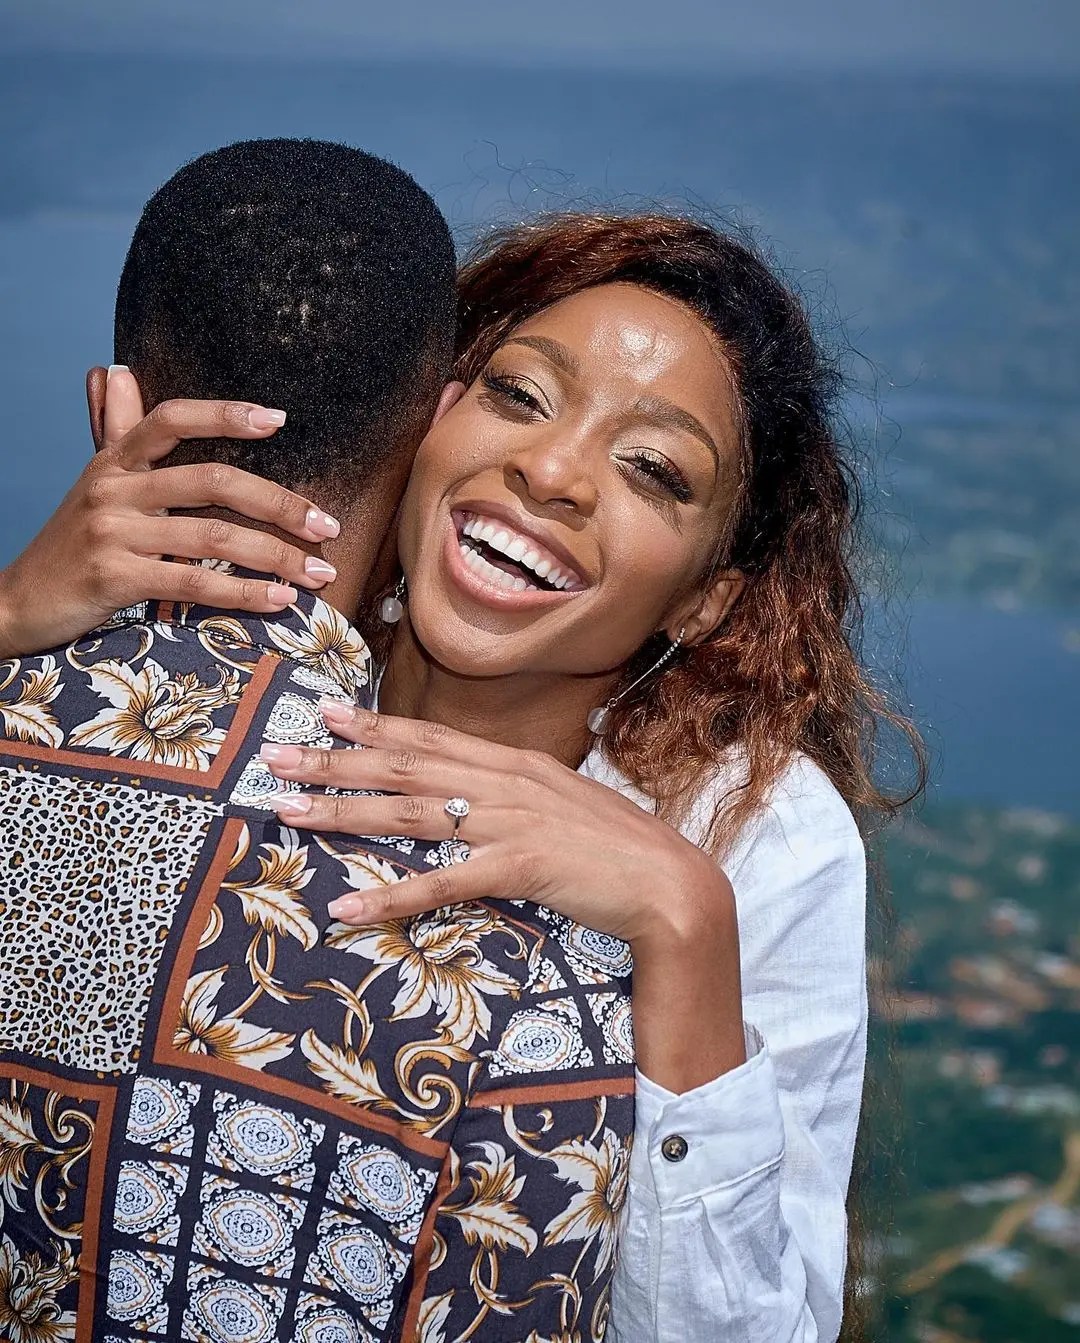 Thato Mosehle is officially off the market